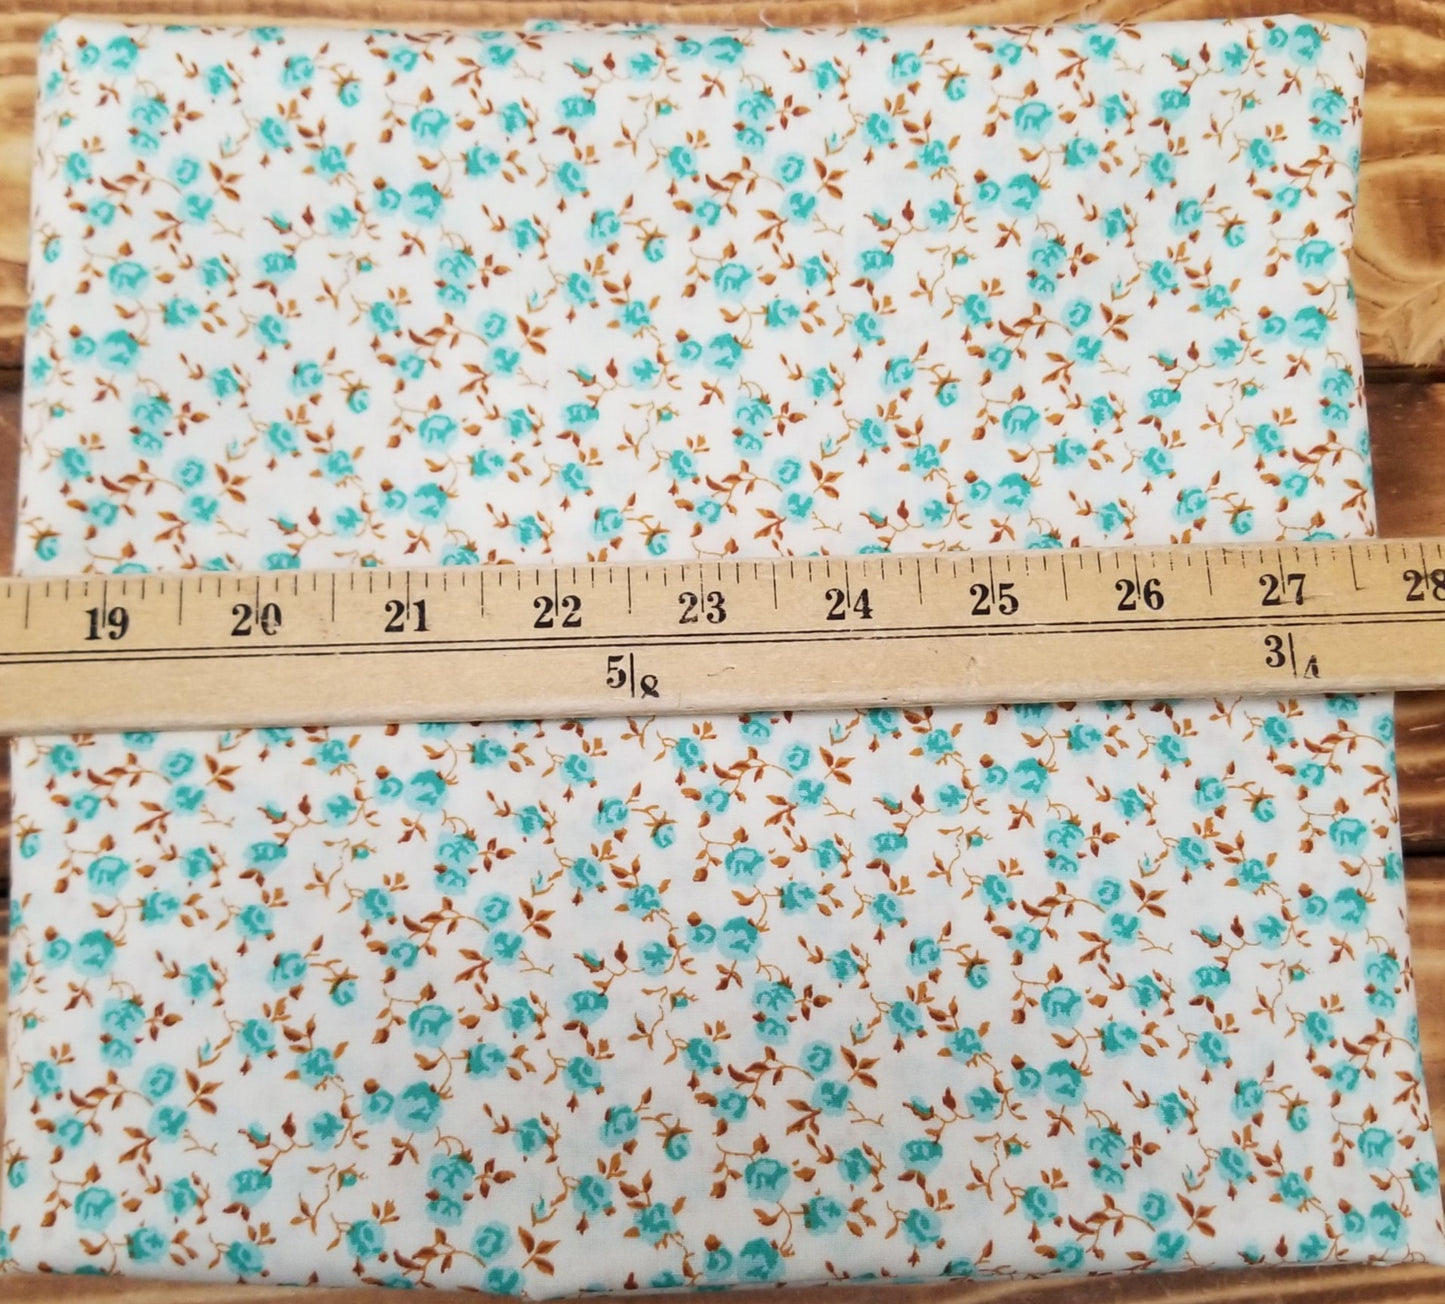 Designer Deadstock Cottage Core Blue and Cream Cotton Spandex Stretch Poplin Woven- Sold by the yard